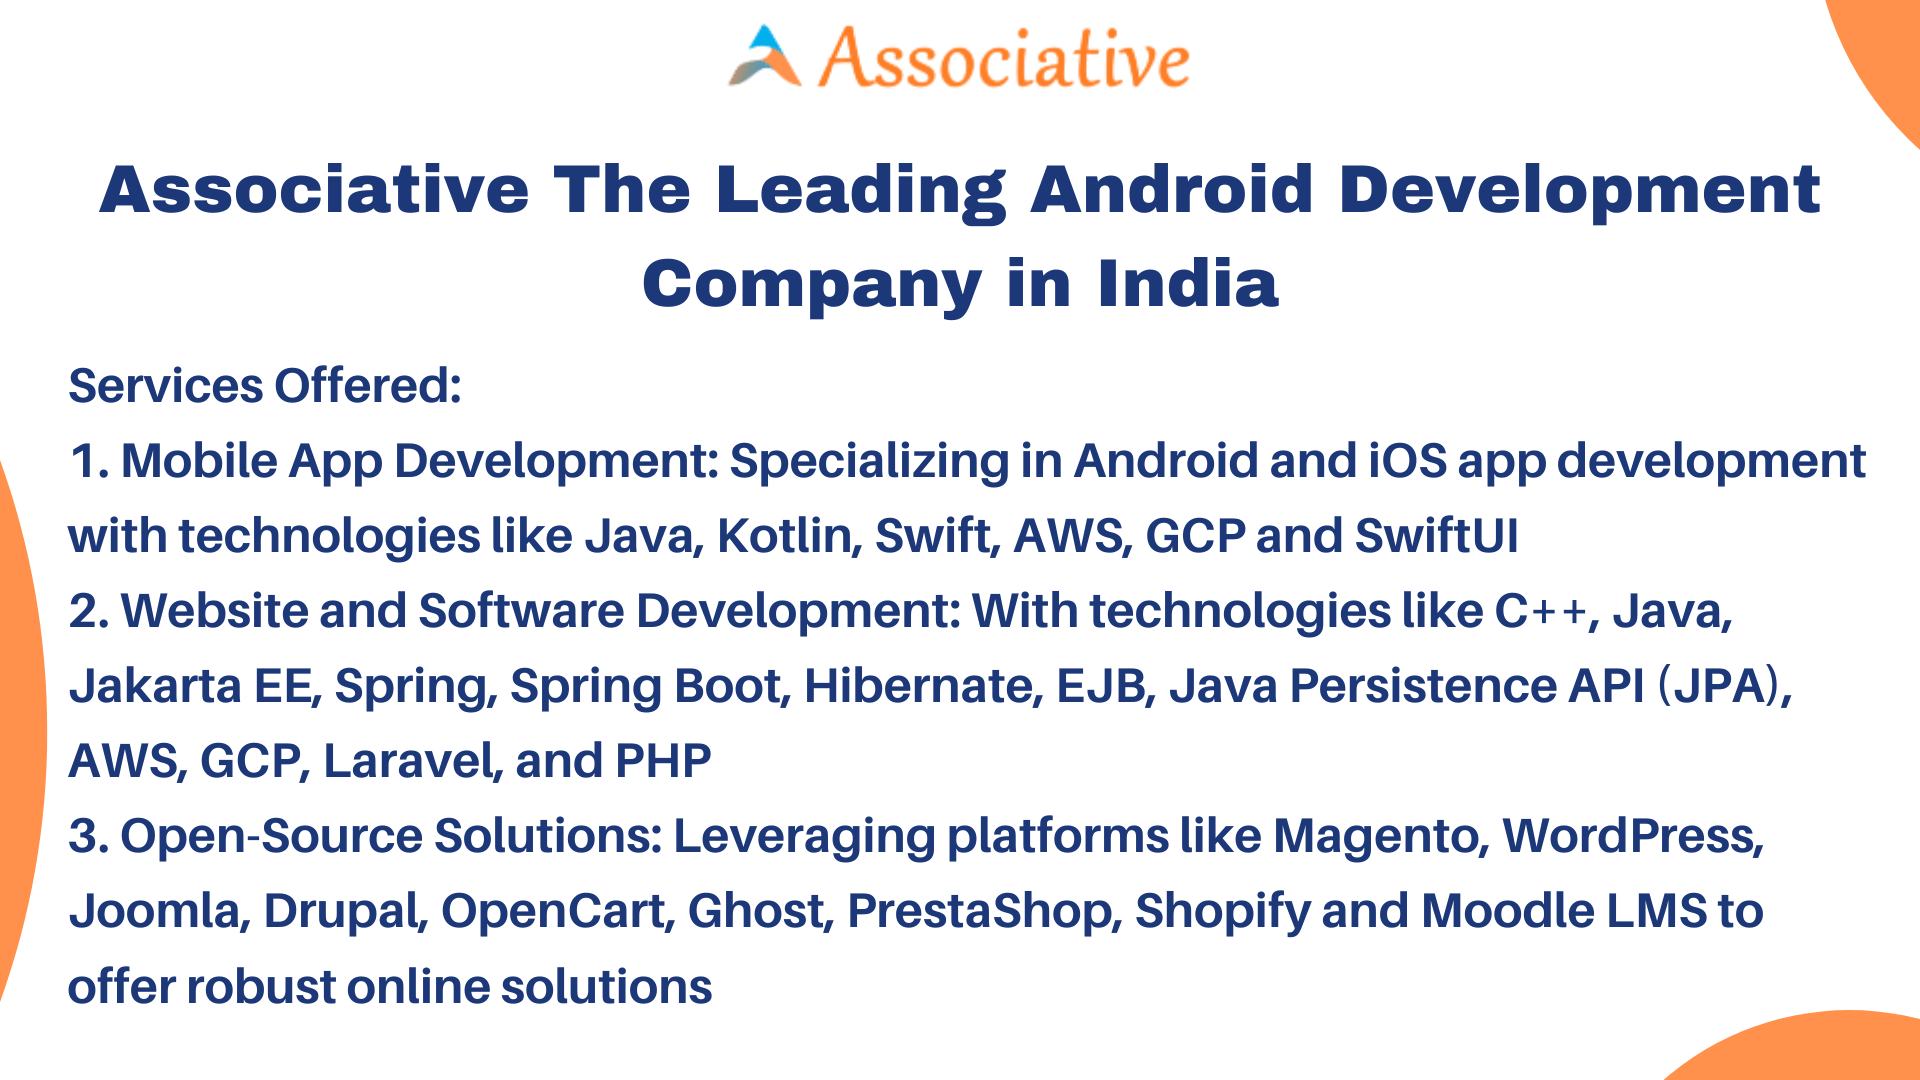 Associative The Leading Android Development Company in India